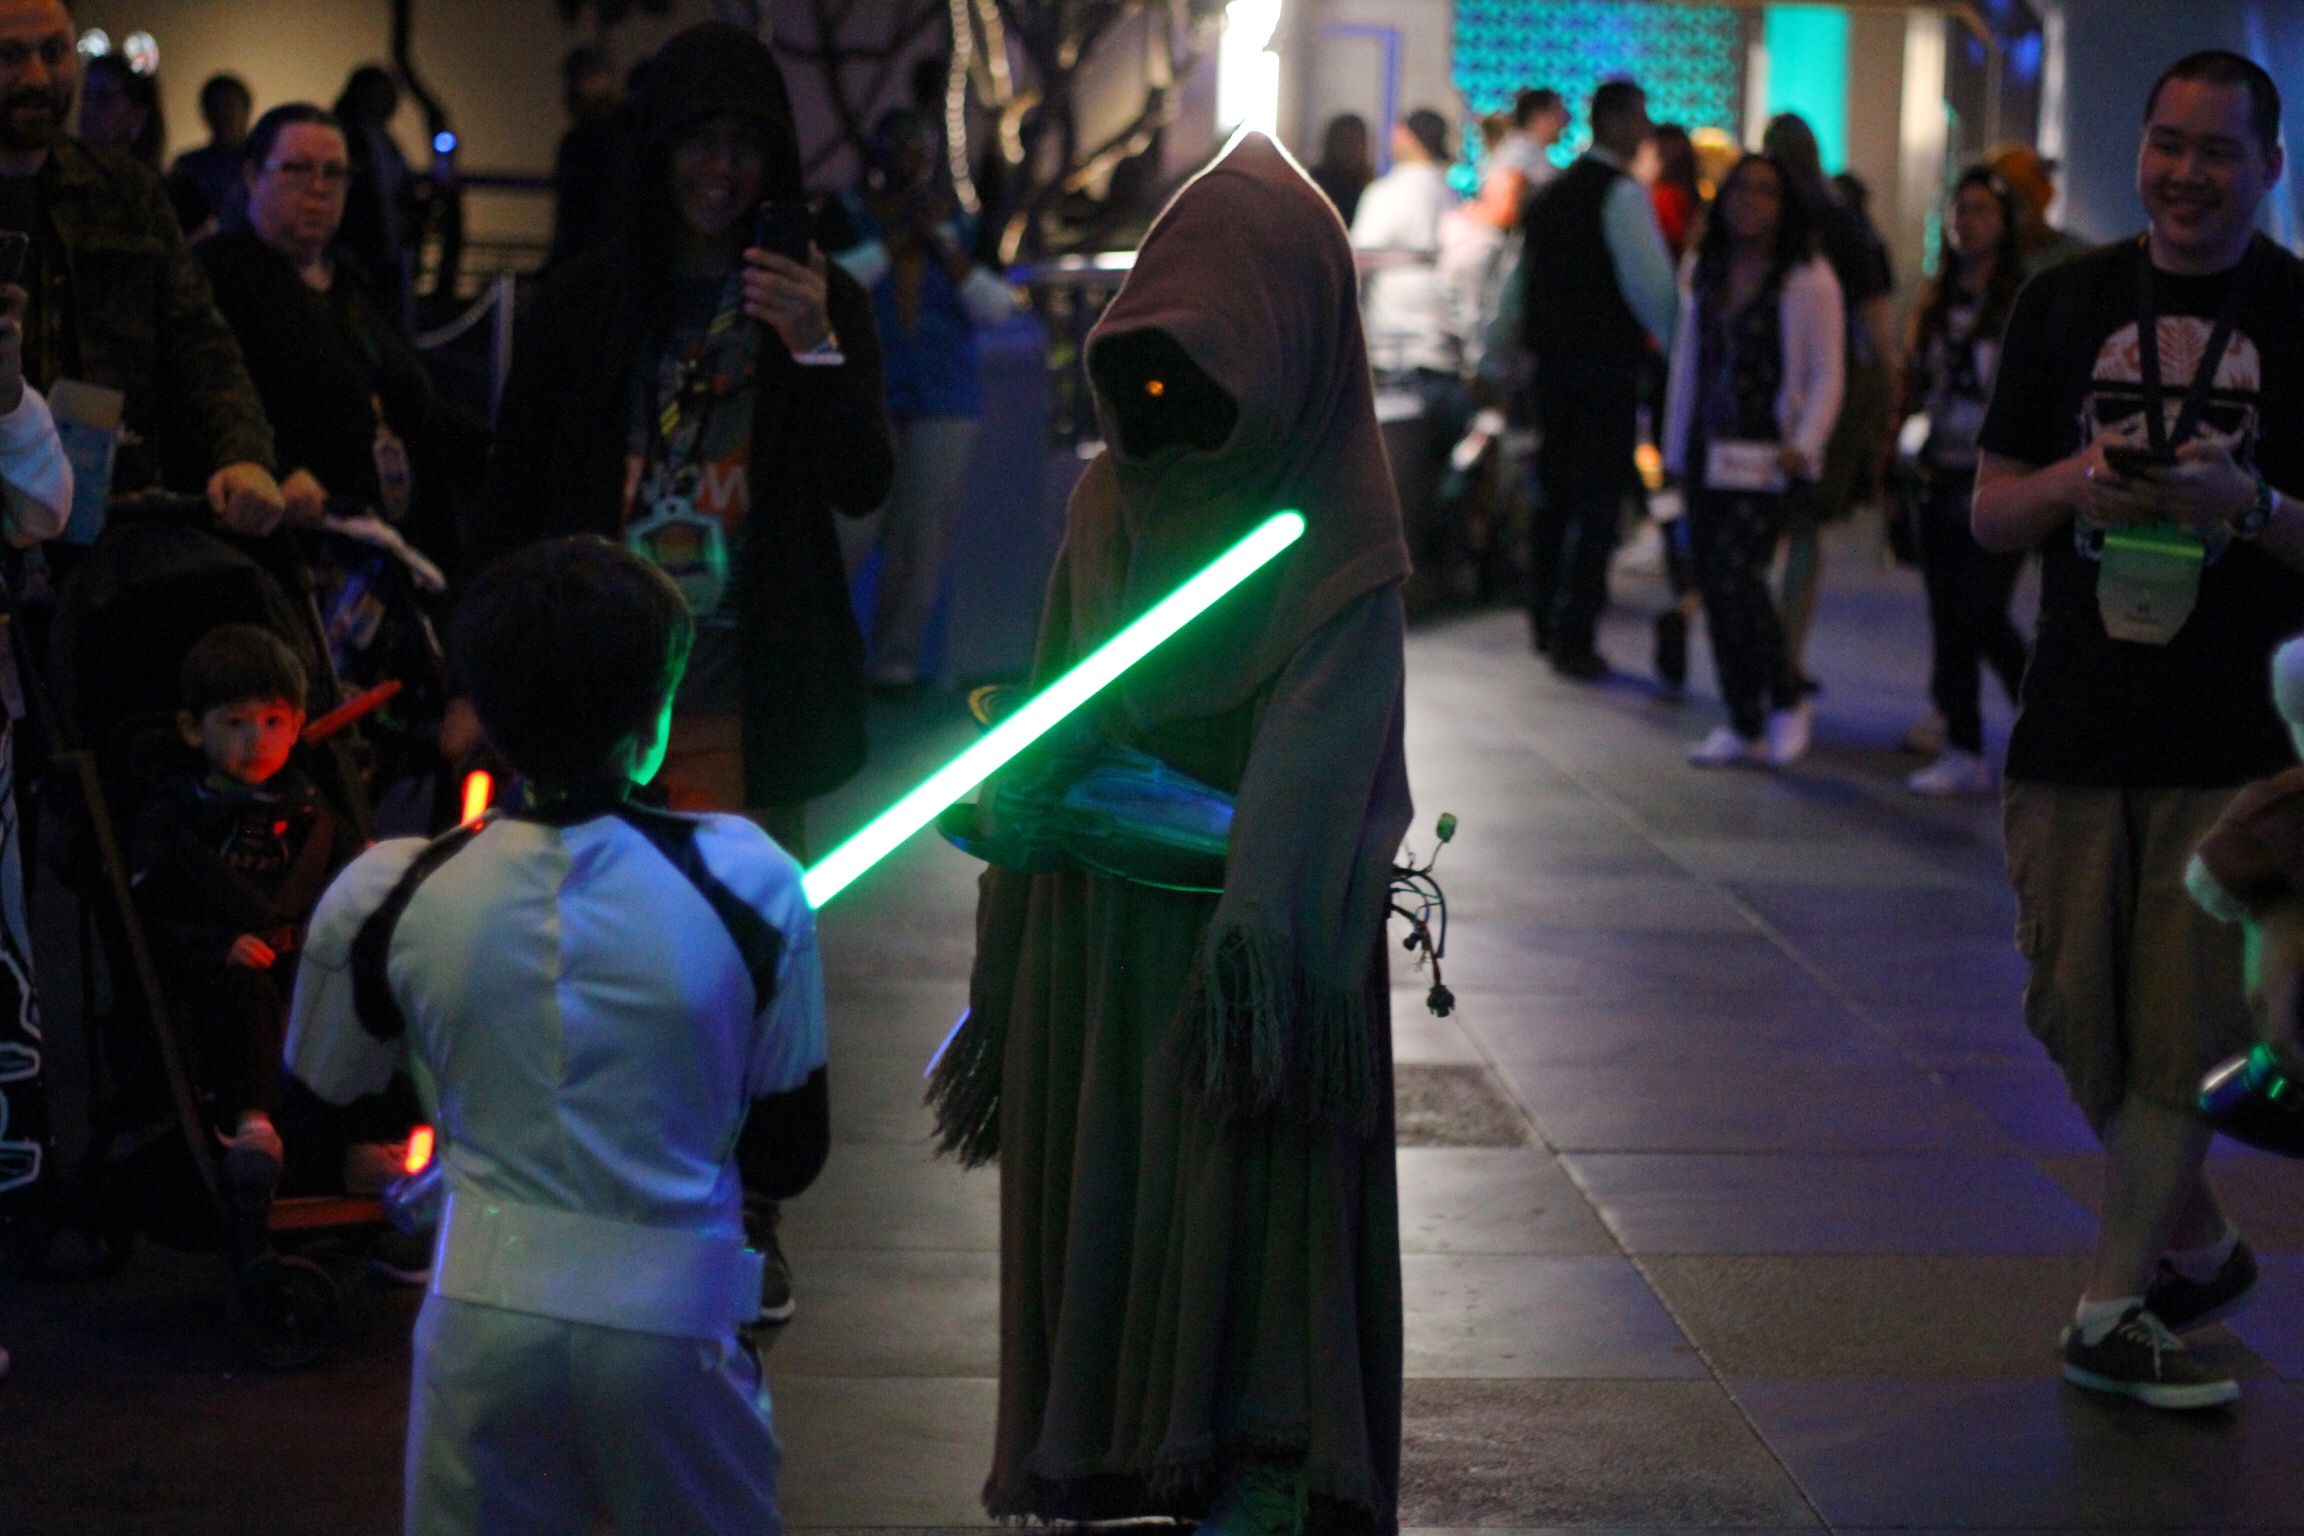 The Most Unique Experiences Come From a Galaxy Far Far Away at Star Wars Nite